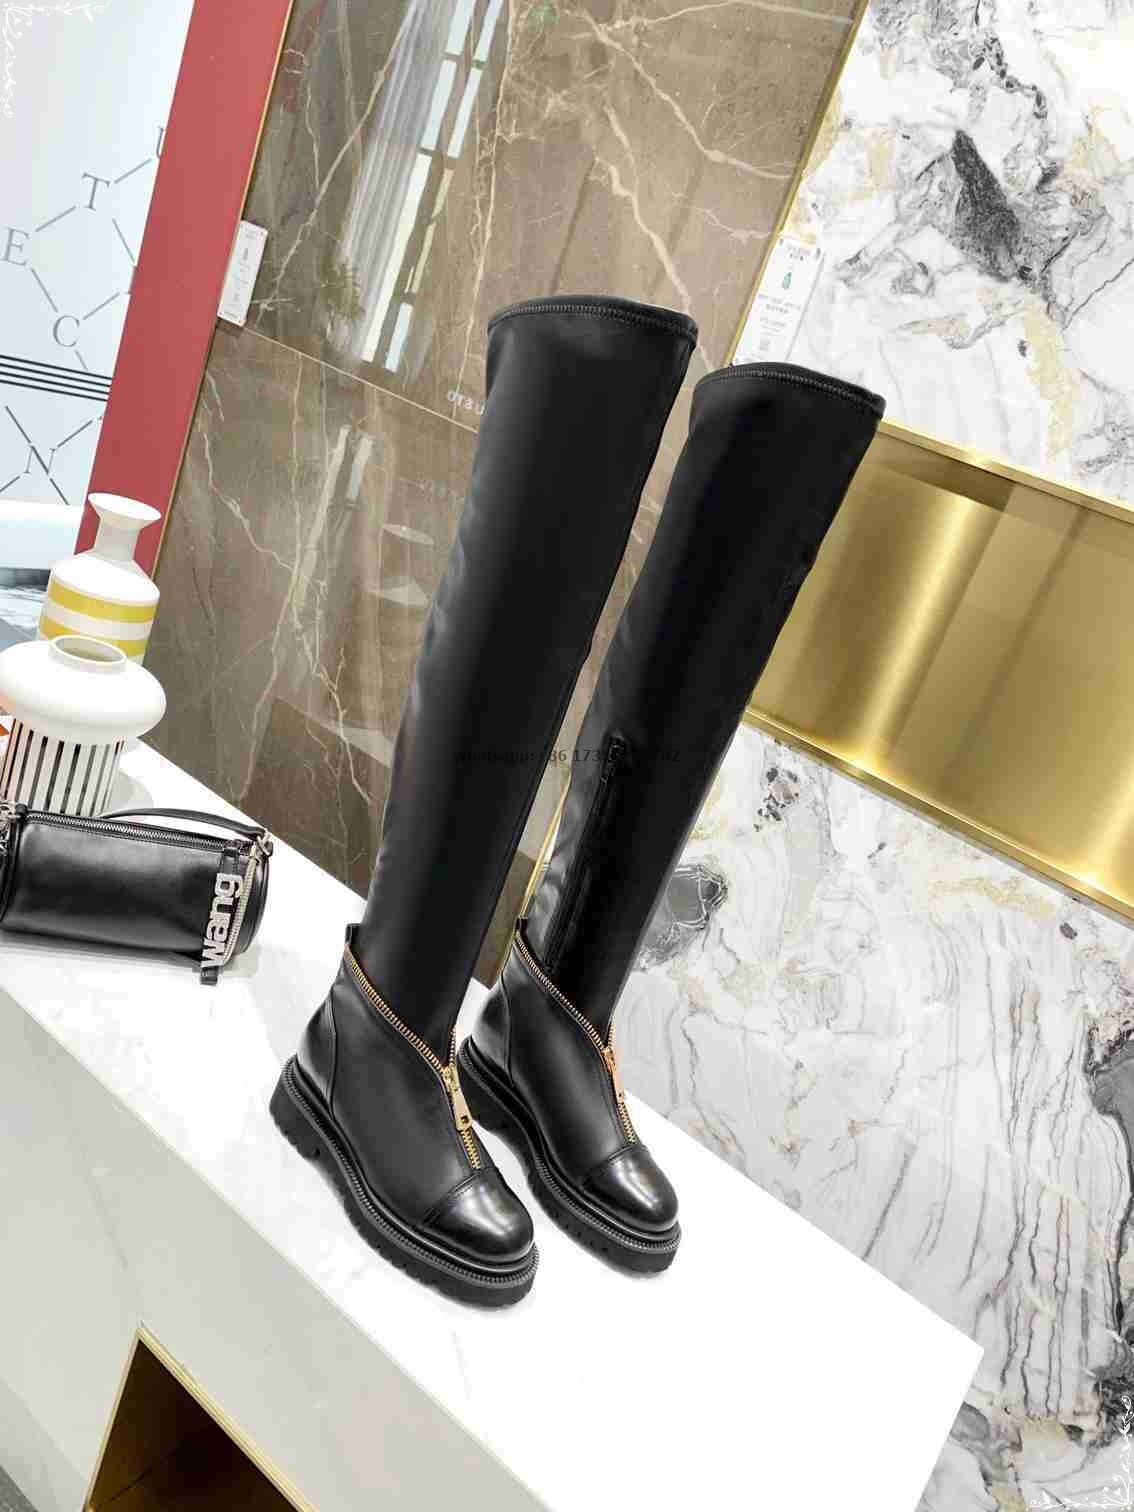 Round Toe Platform Flat Heel Cowhide Stretch Over the Knee Boots Front Zipper Long Boots Luxry Brand Design Ladies Winter Boots